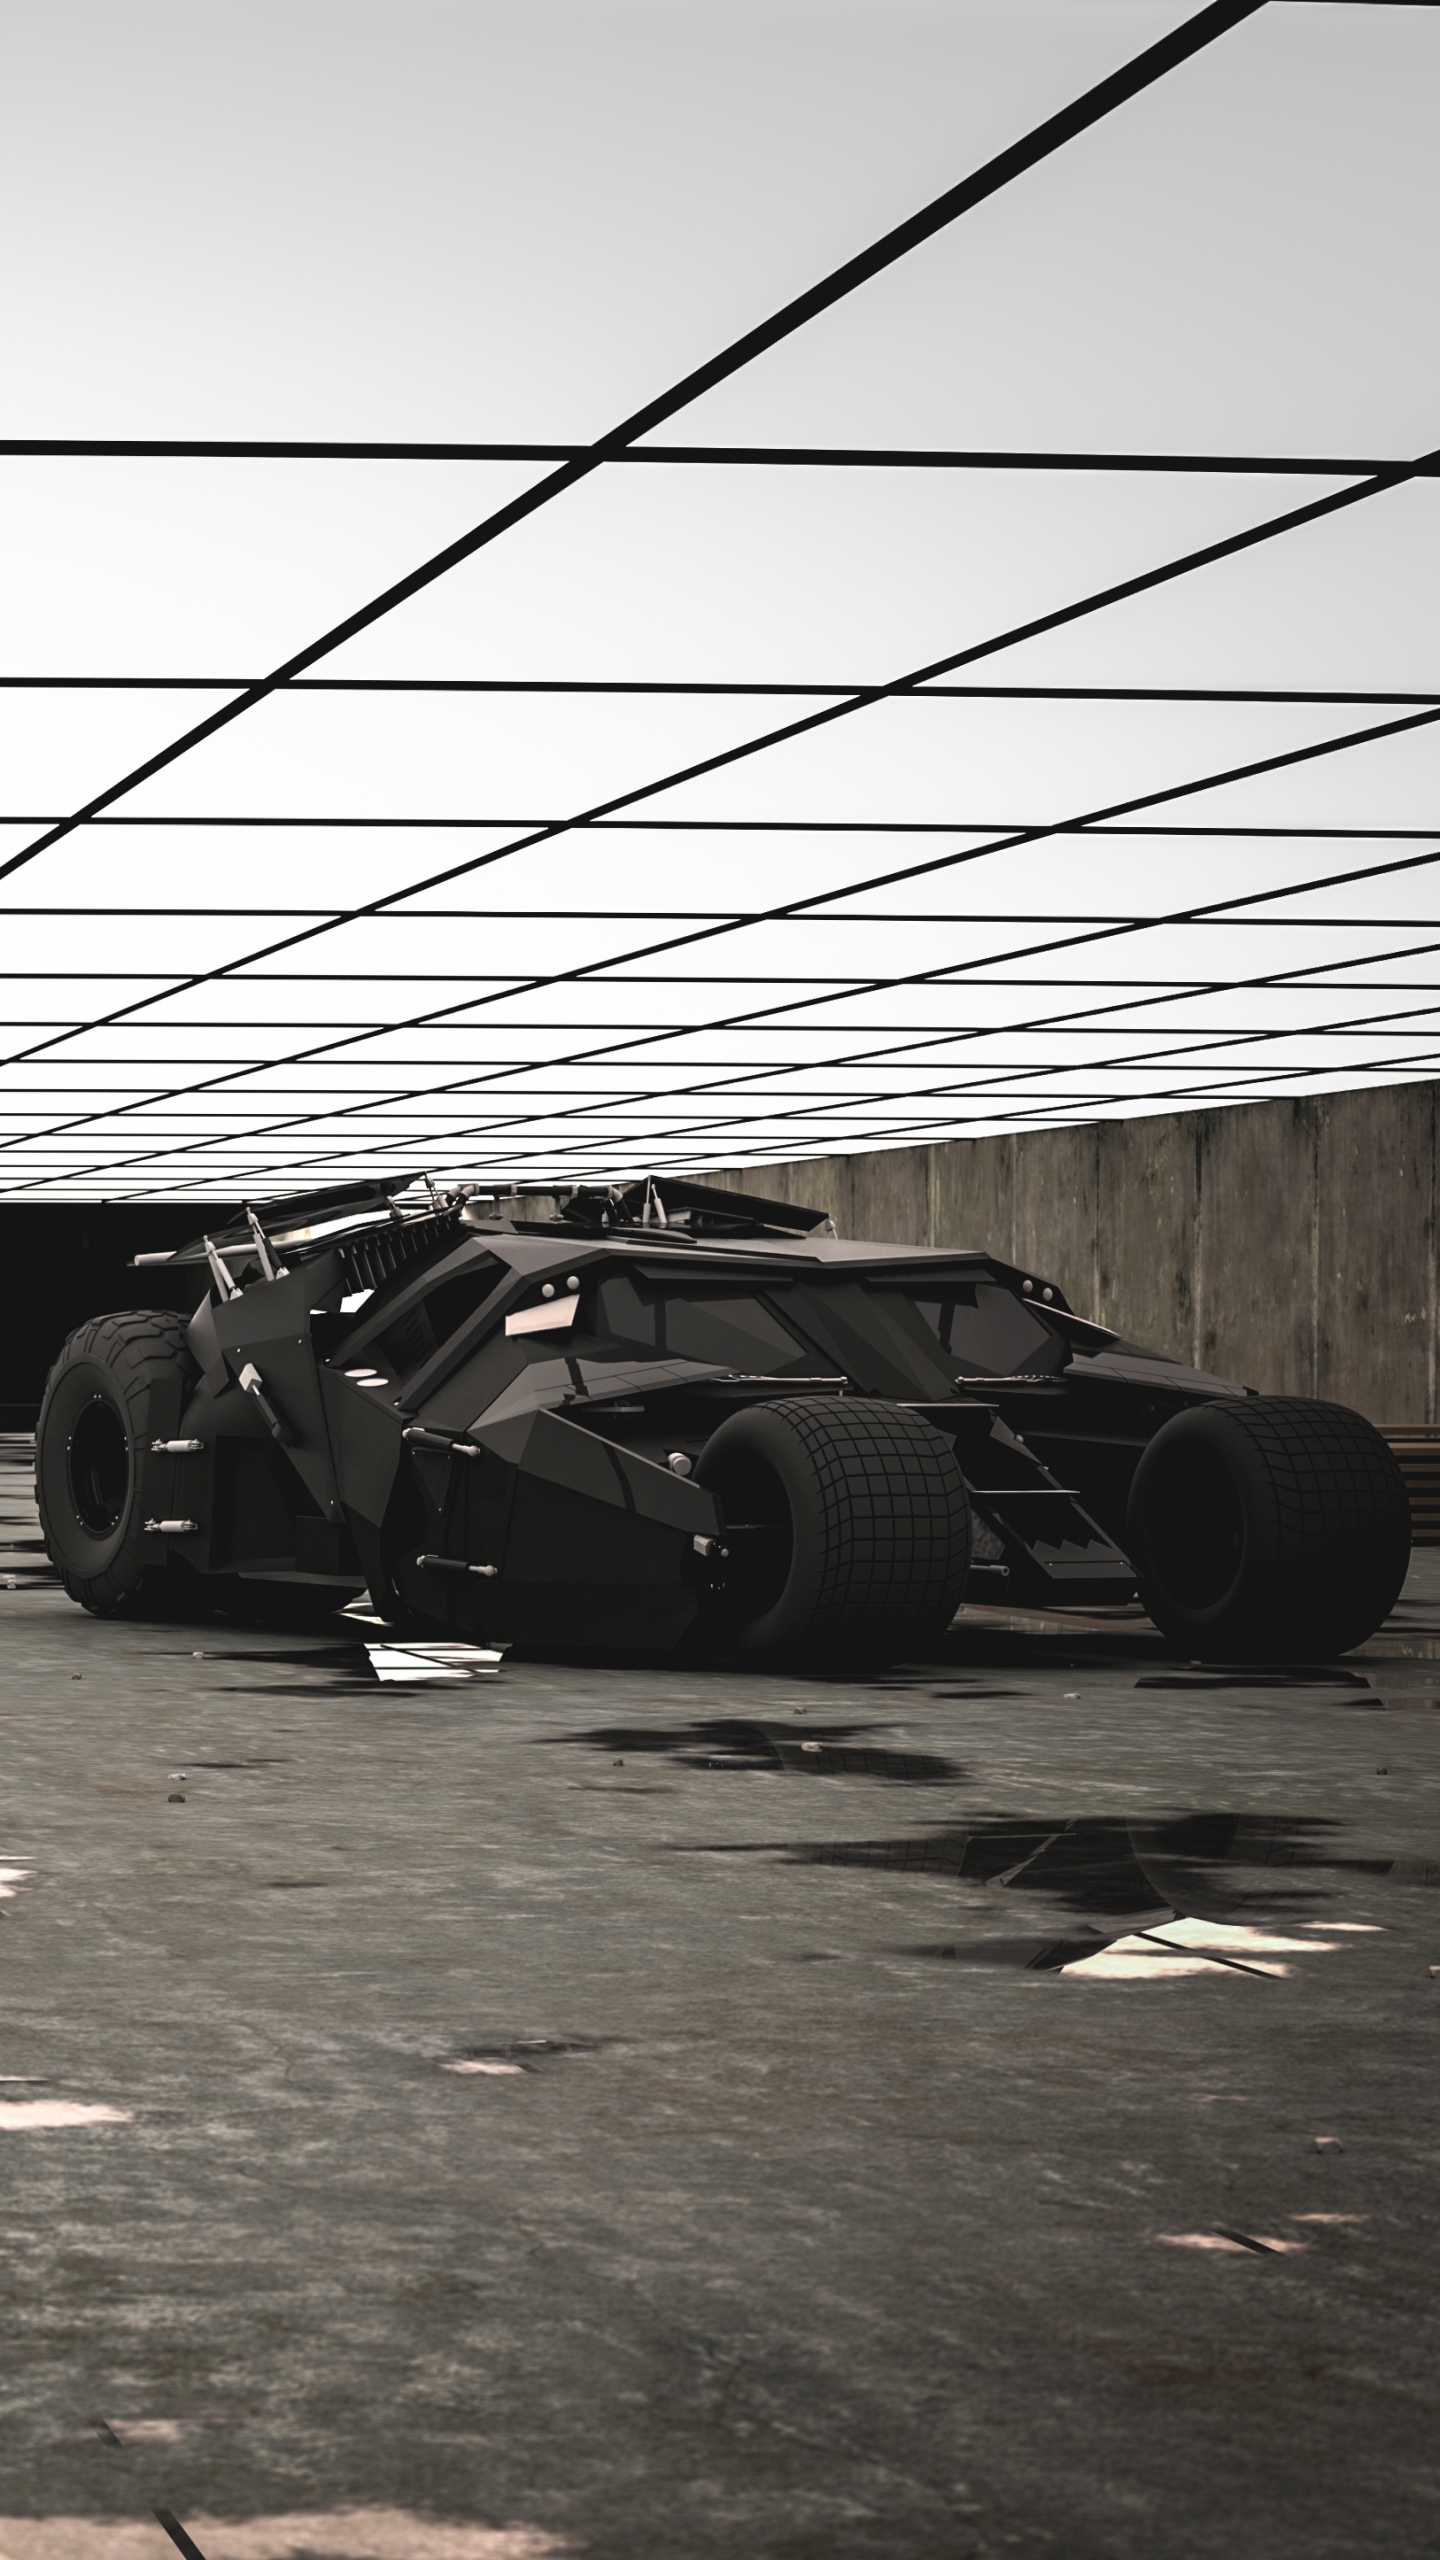 Batmobile Tumbler wallpapers for desktop, download free Batmobile Tumbler  pictures and backgrounds for PC 